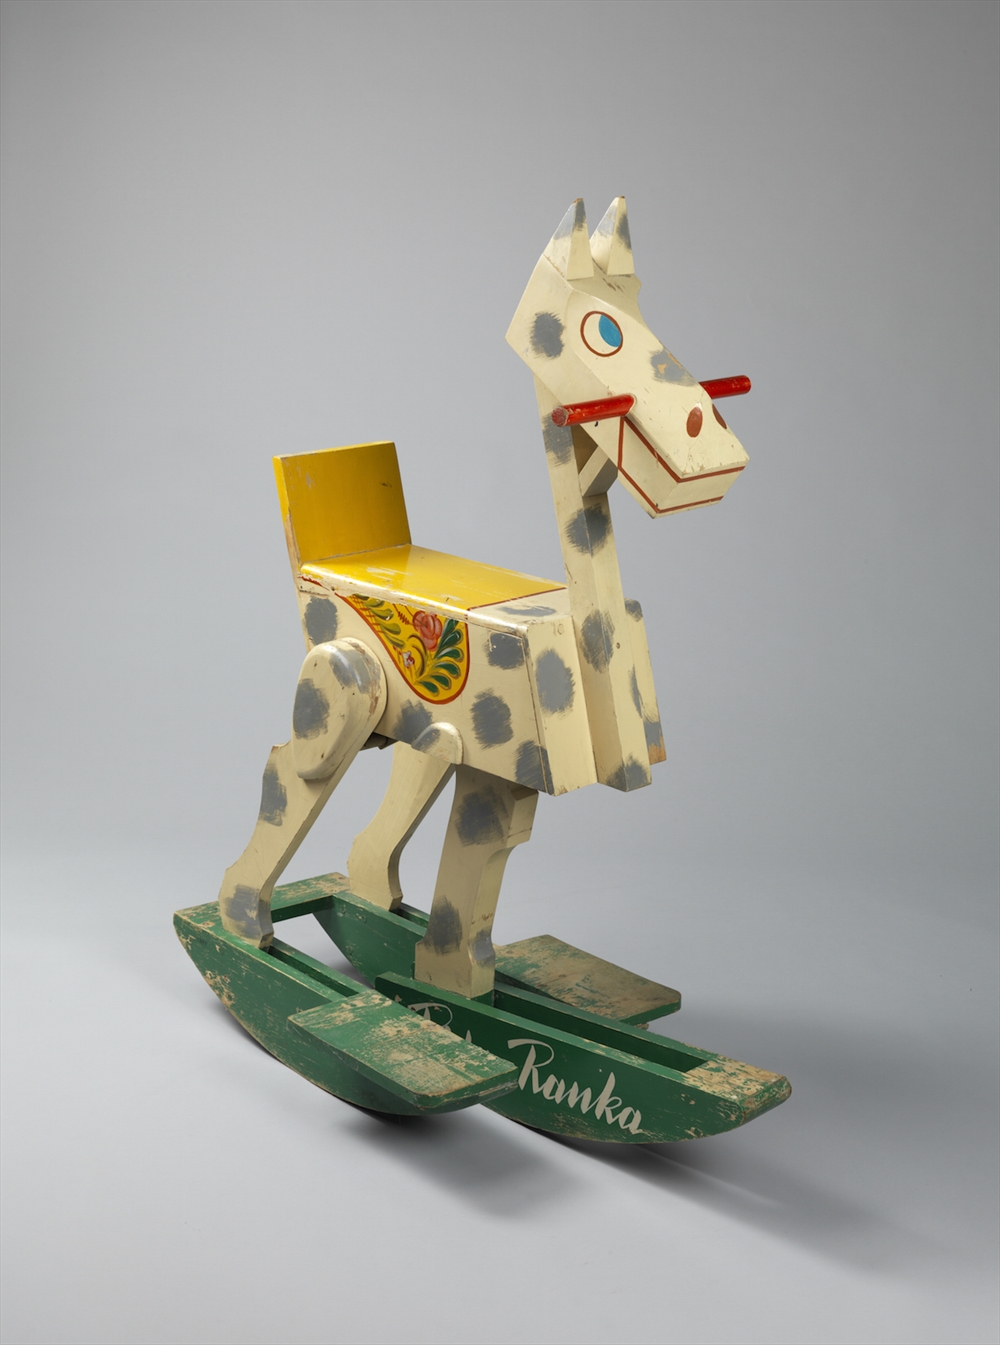 Archisearch THE CHARMING WORLD OF SWEDISH WOODEN TOYS IN THE BARD GRADUATE CENTER GALLERY, NY